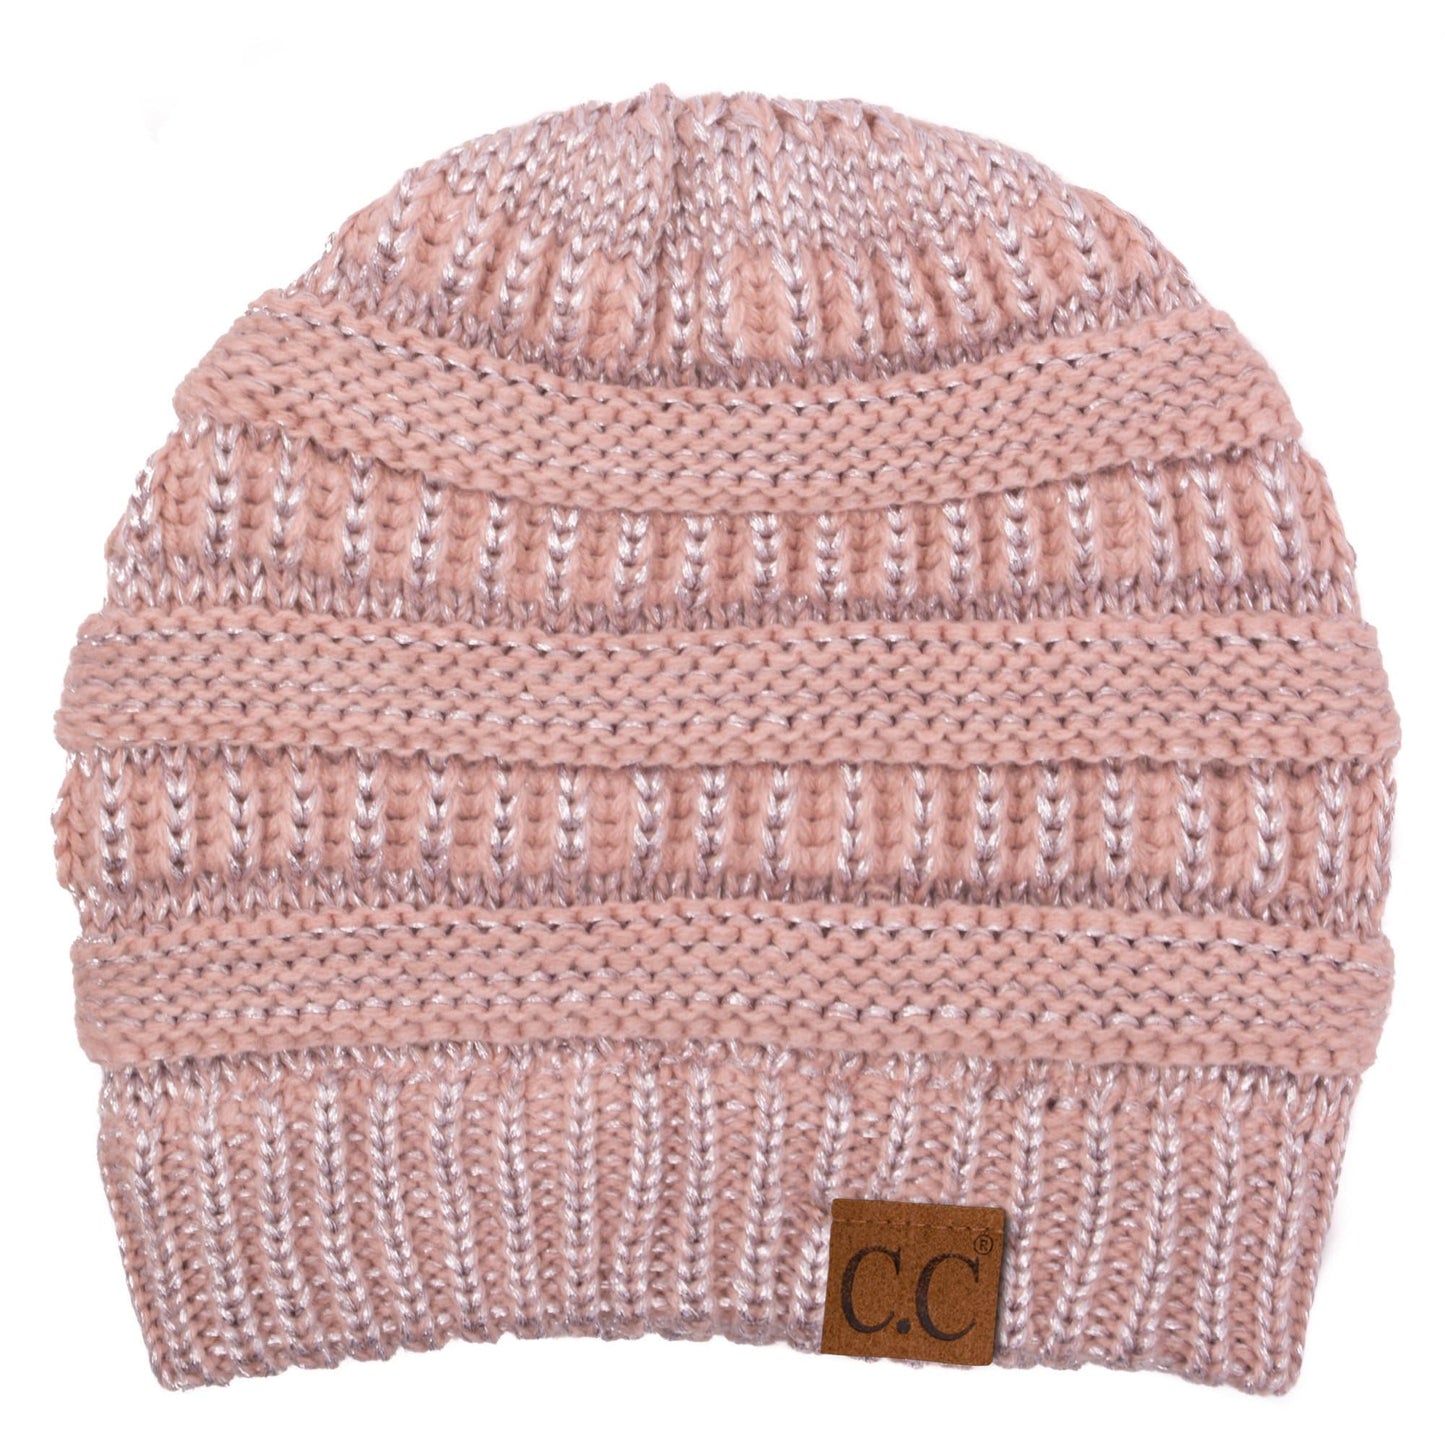 C.C Apparel Indi Pink/Silver C.C Hat 20AM - Slouchy Thick Warm Cap Hat Skully Metallic Cable Knit Beanie